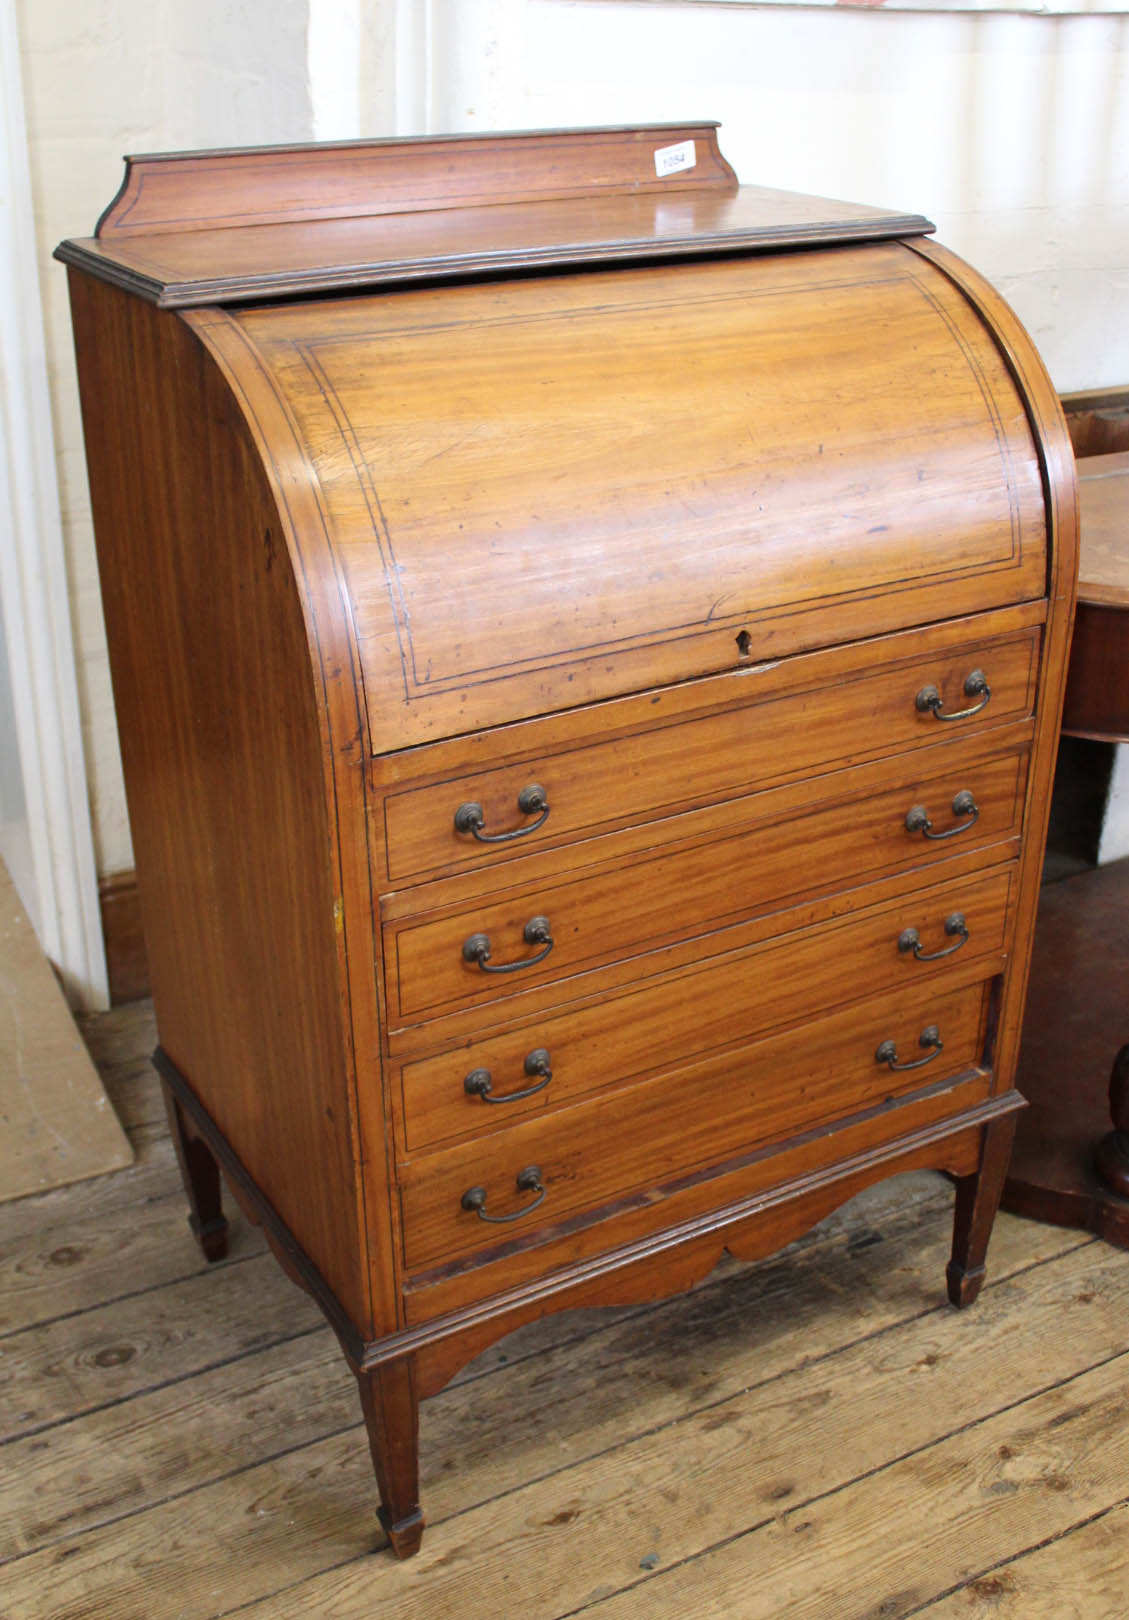 An Edwardian inlaid satinwood small roll top desk with four drawers